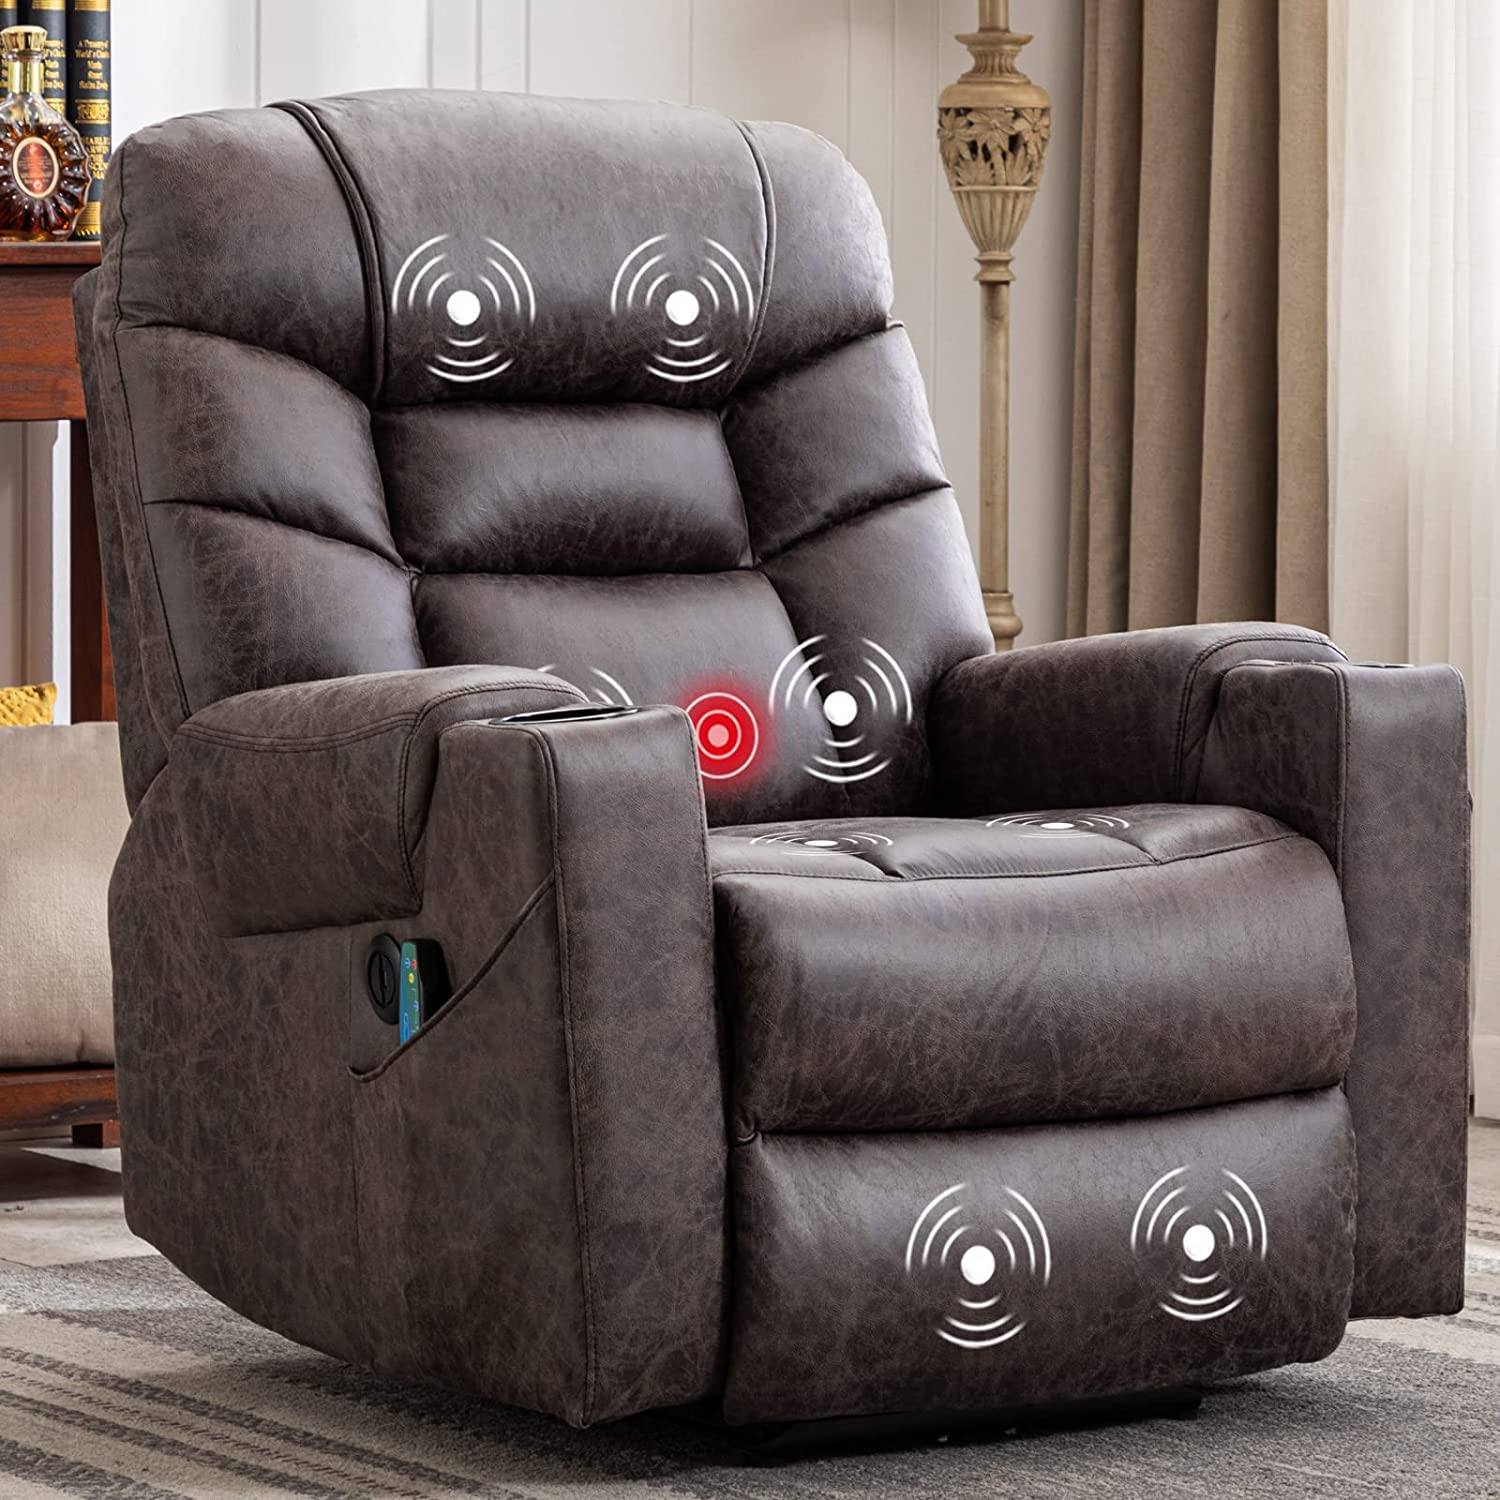 ANJ Massage Electric Recliner Chairs